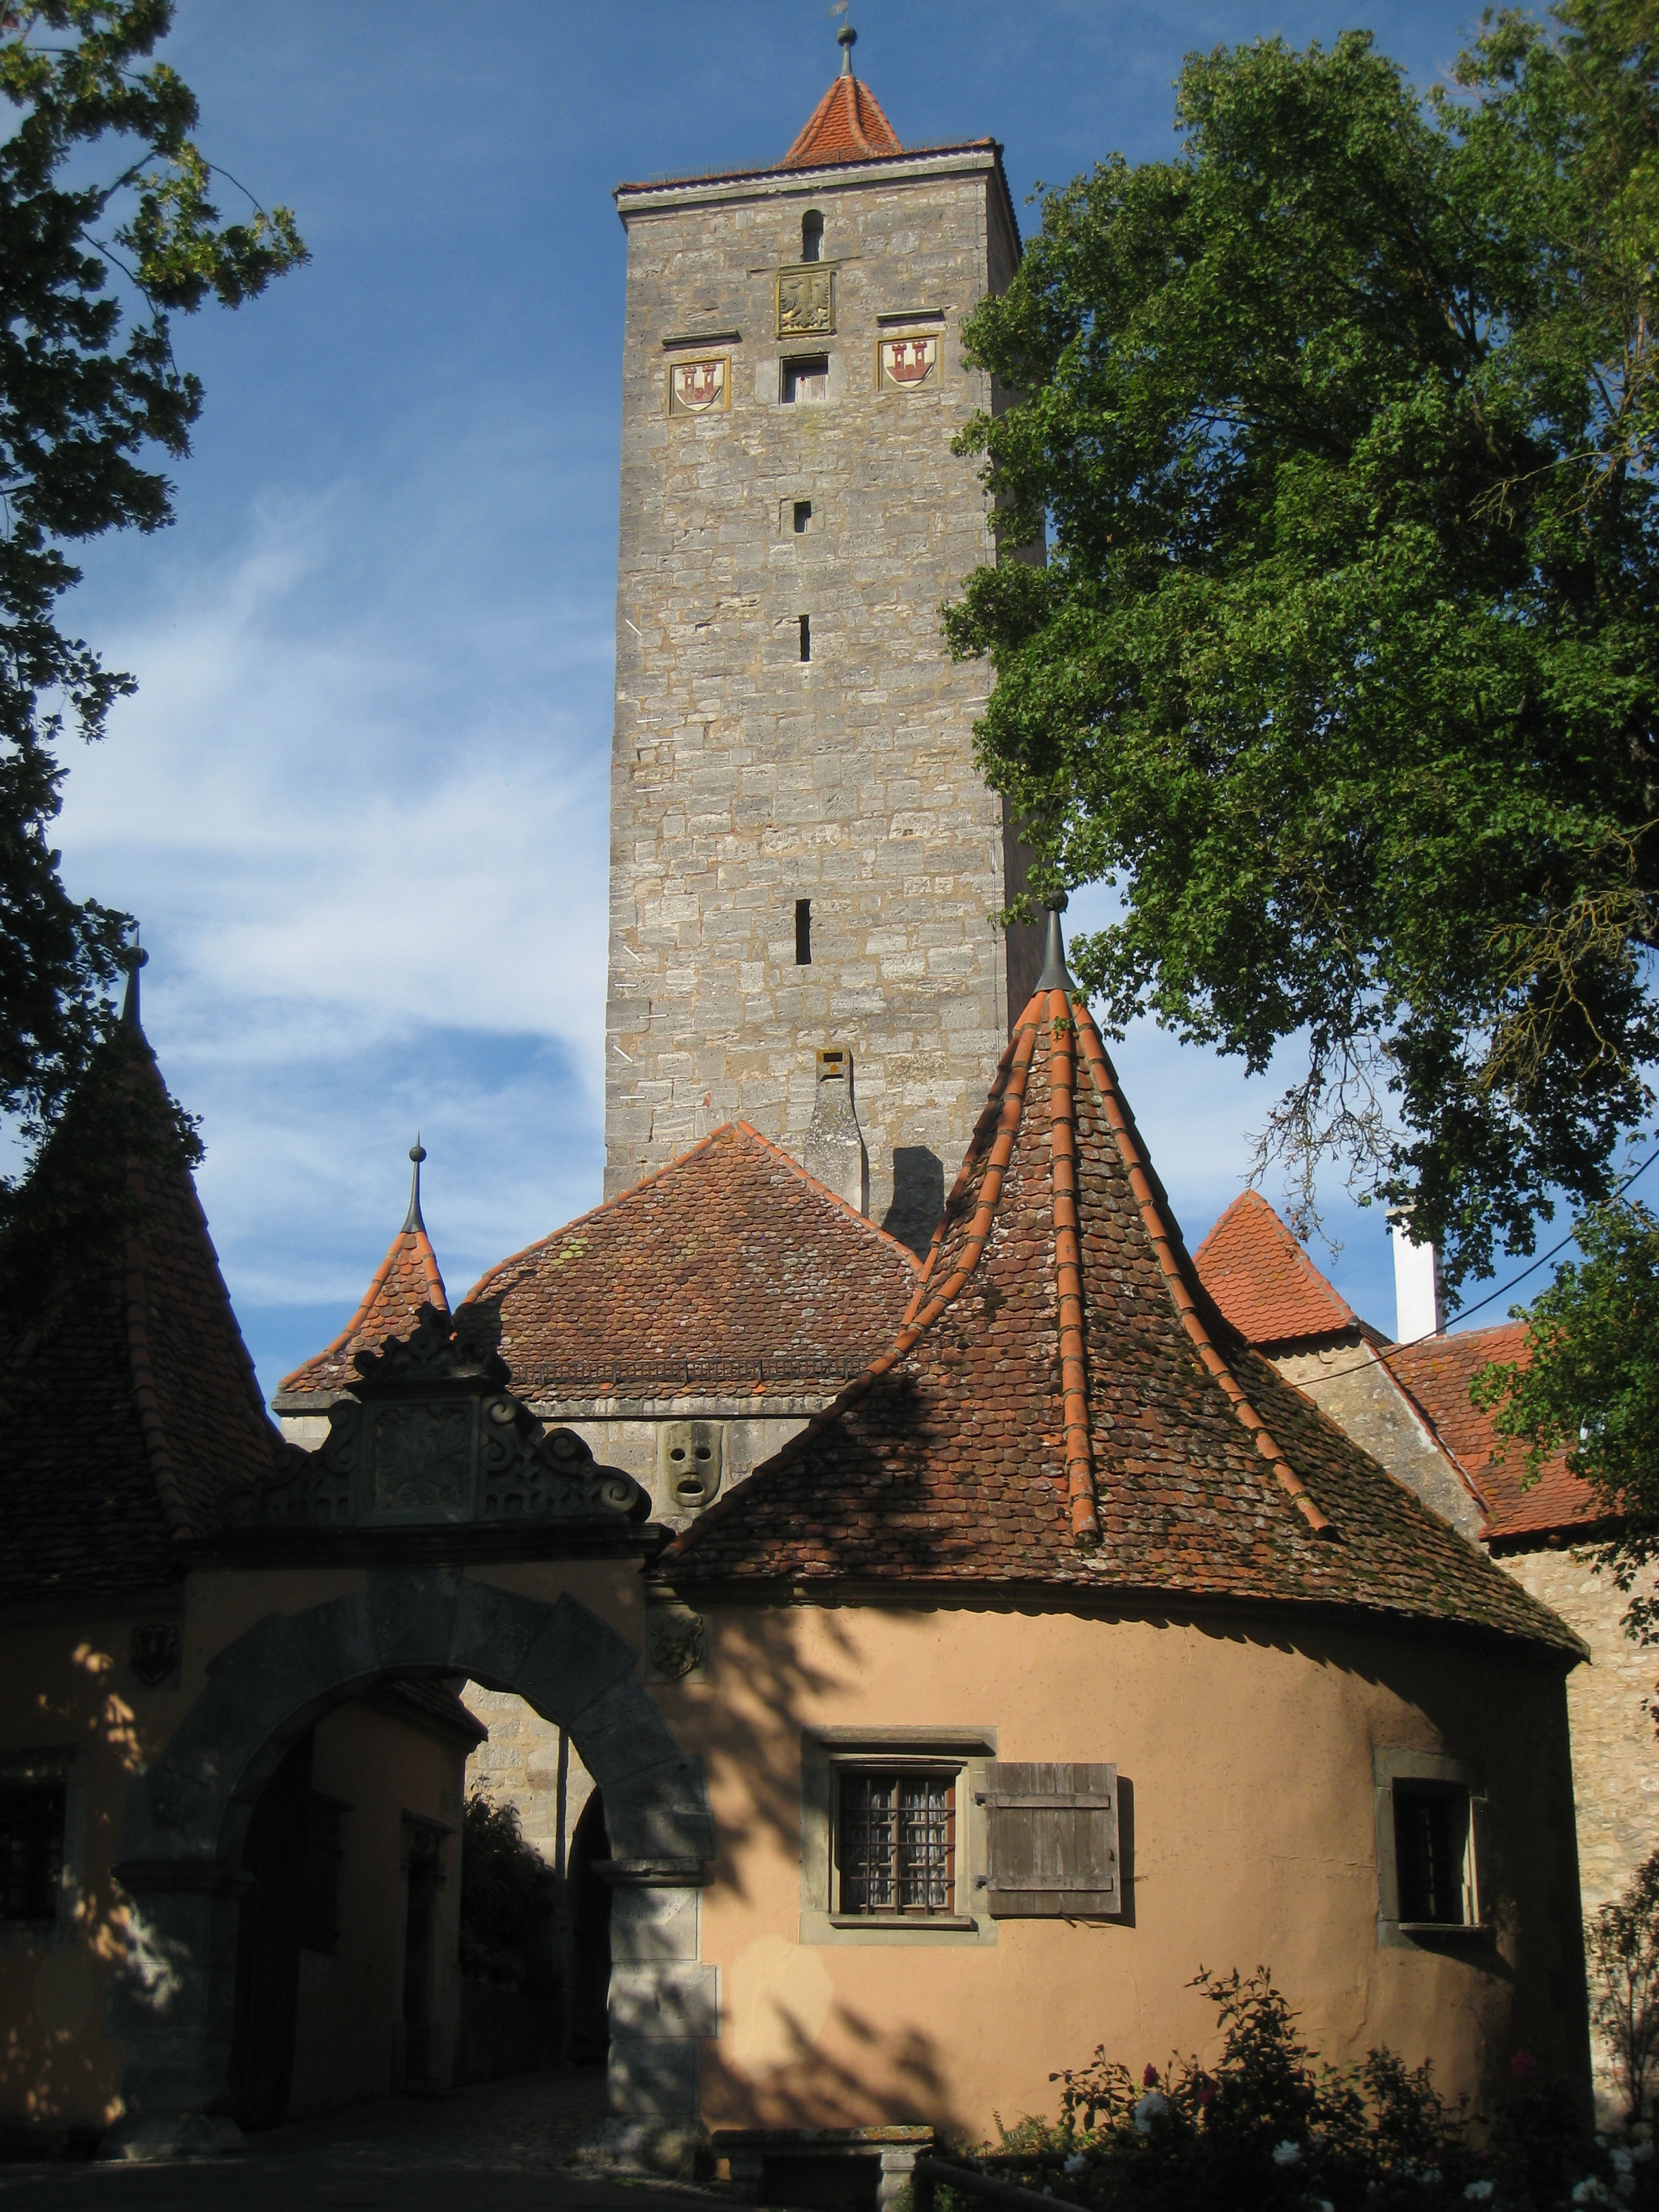 File:Gate and tower - Rothenburg ob der Tauber.JPG - Wikimedia Commons